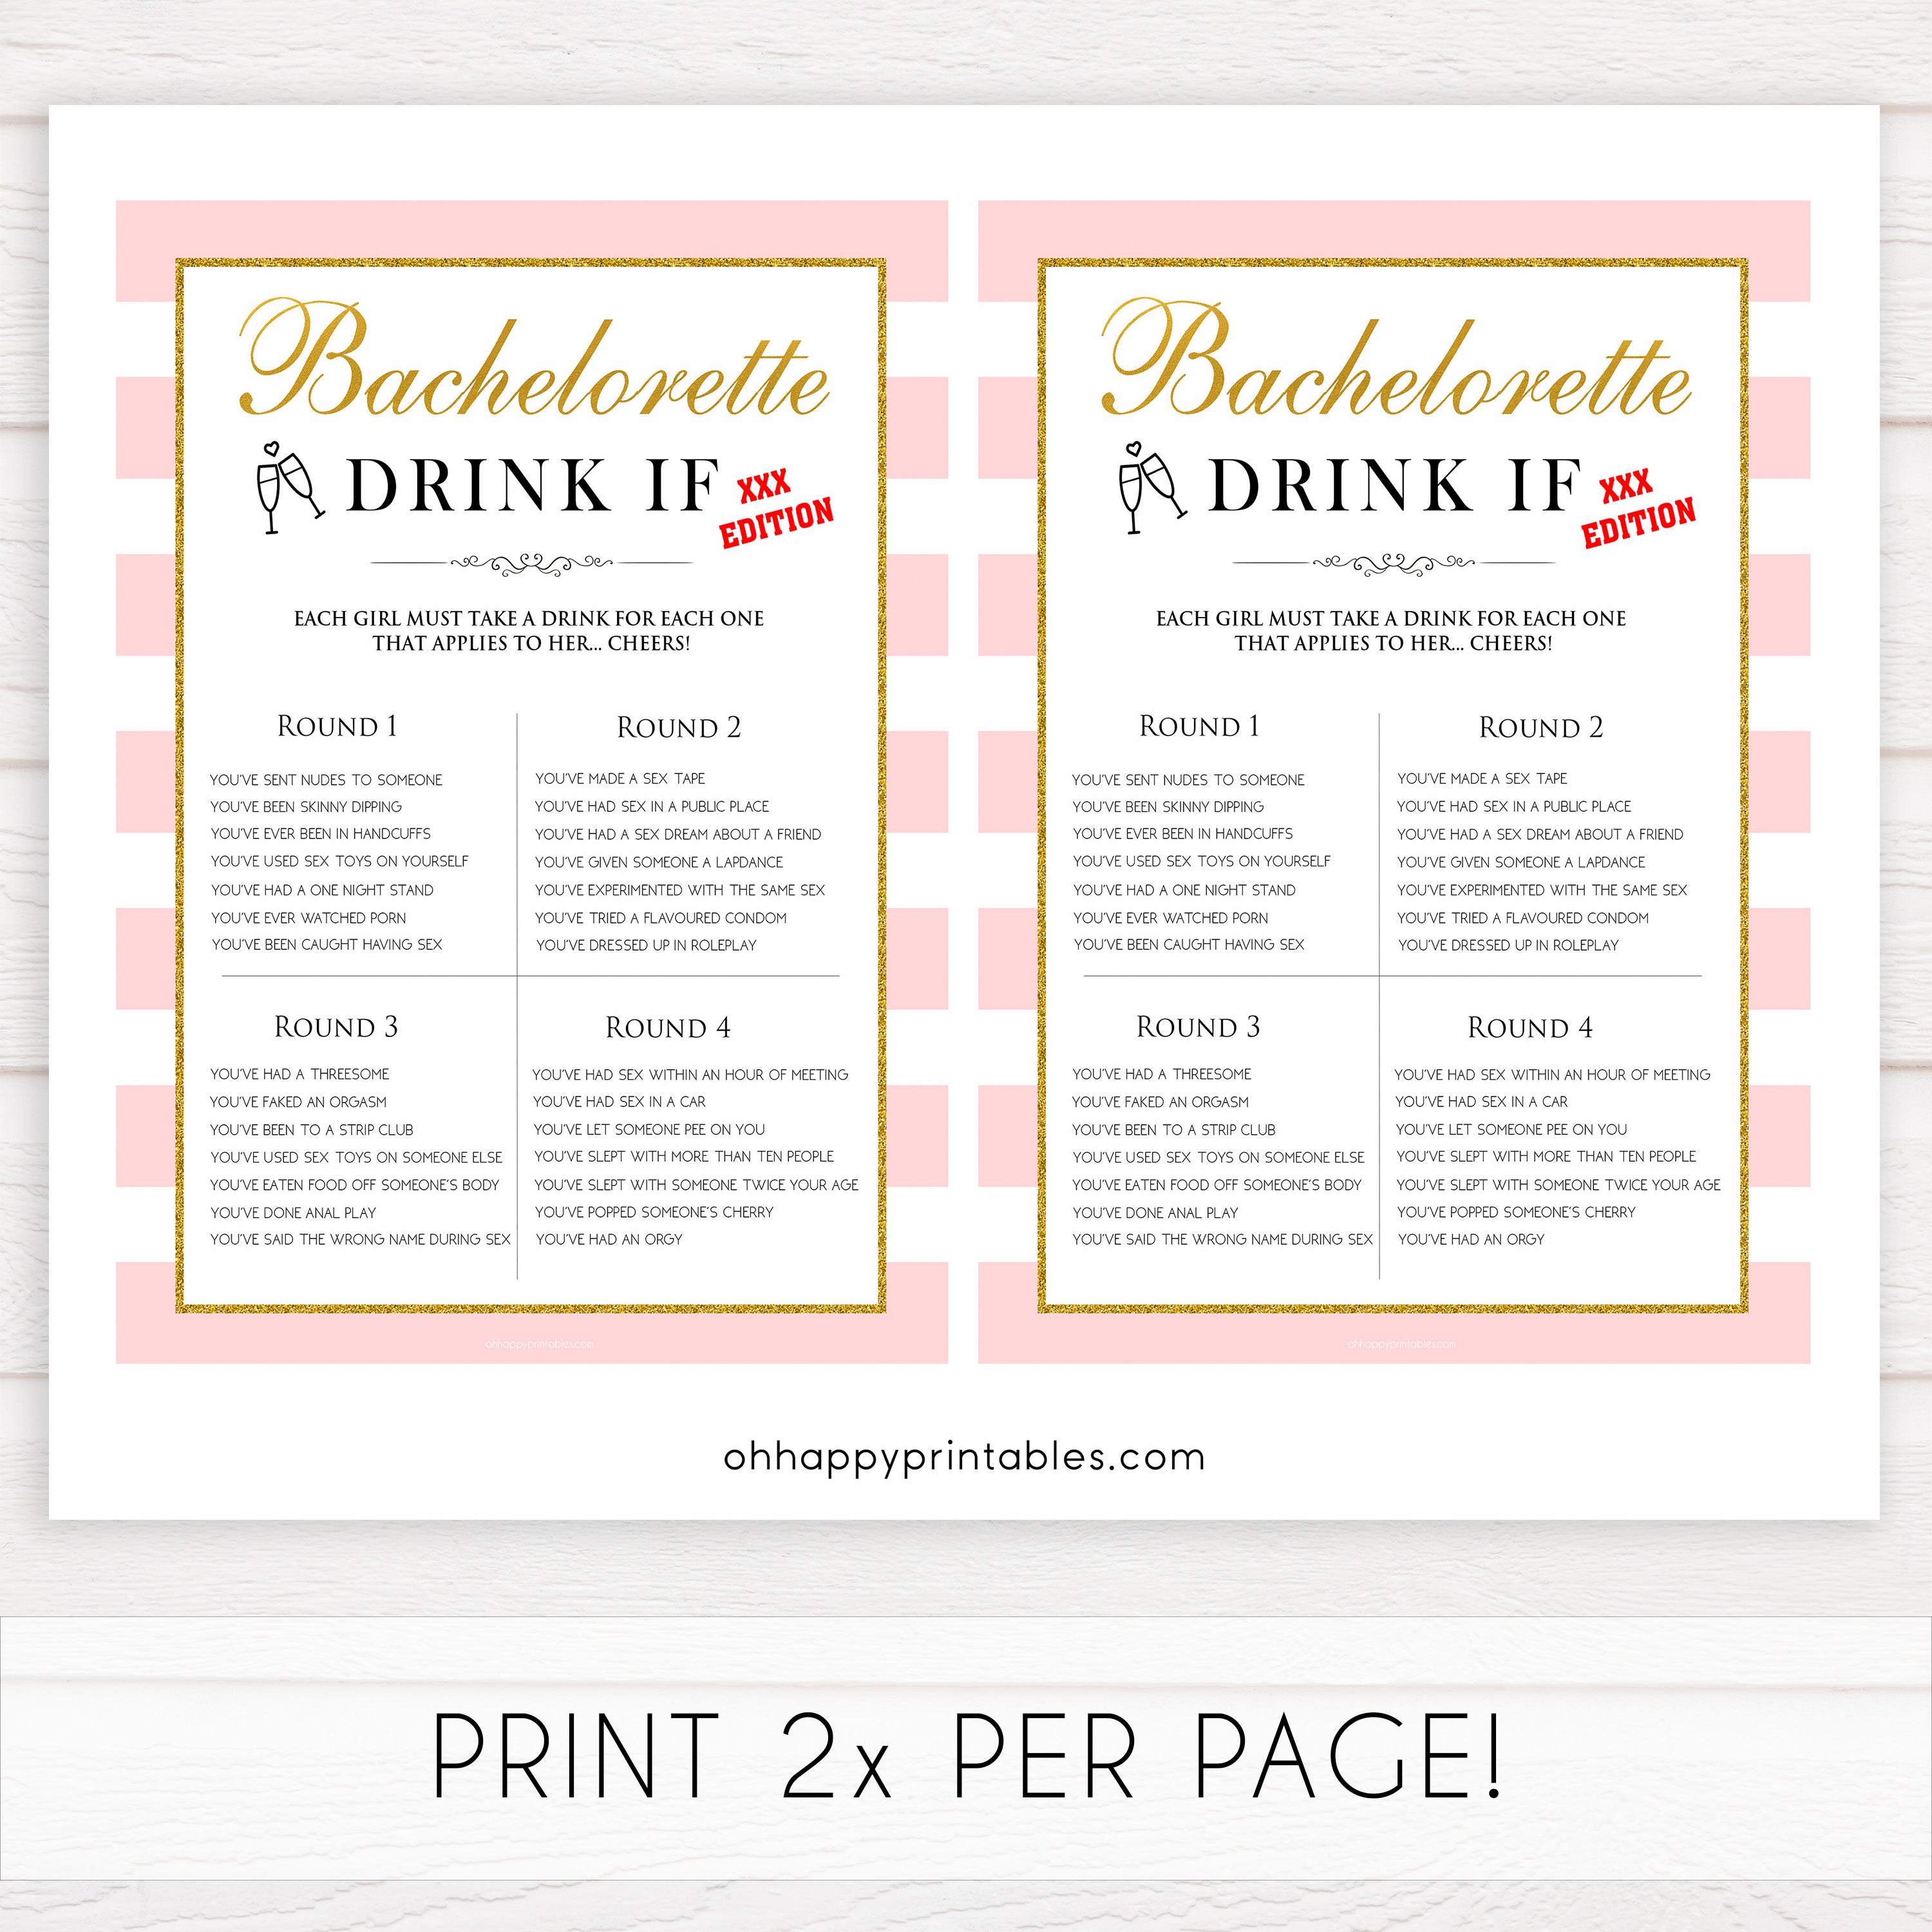 Xxxxx Girl Sex Com - X Rated Bachelorette Drink If Game - Printable Bachelorette Games â€“  OhHappyPrintables